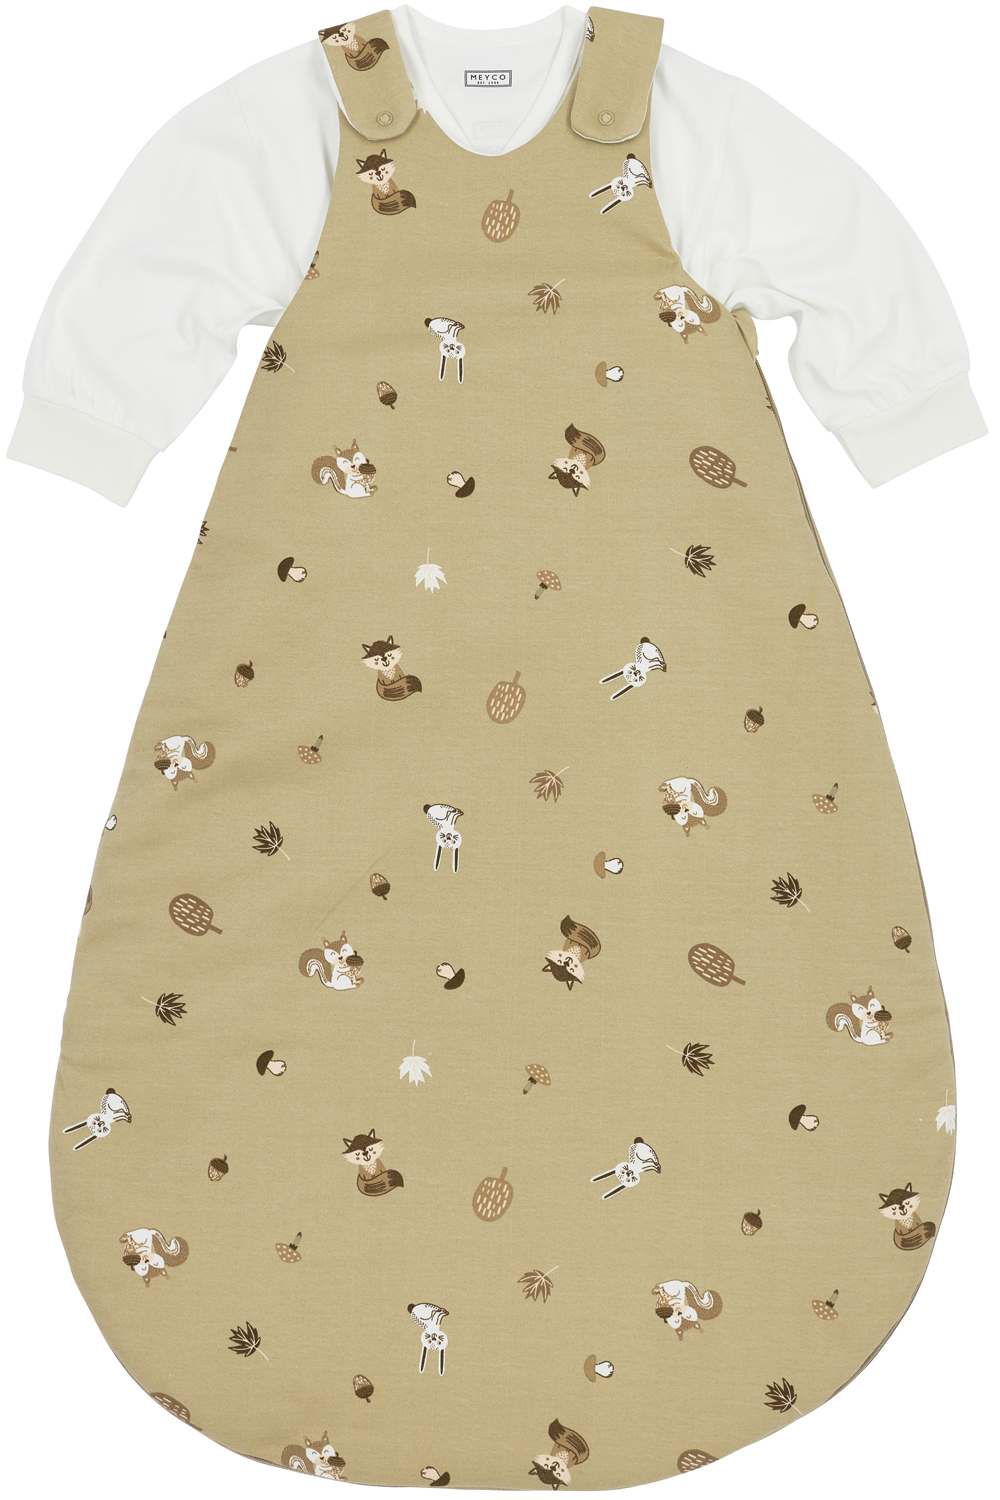 Baby Sleeping Bag 2-piece Lined Forest Animals - Sand - 68/74